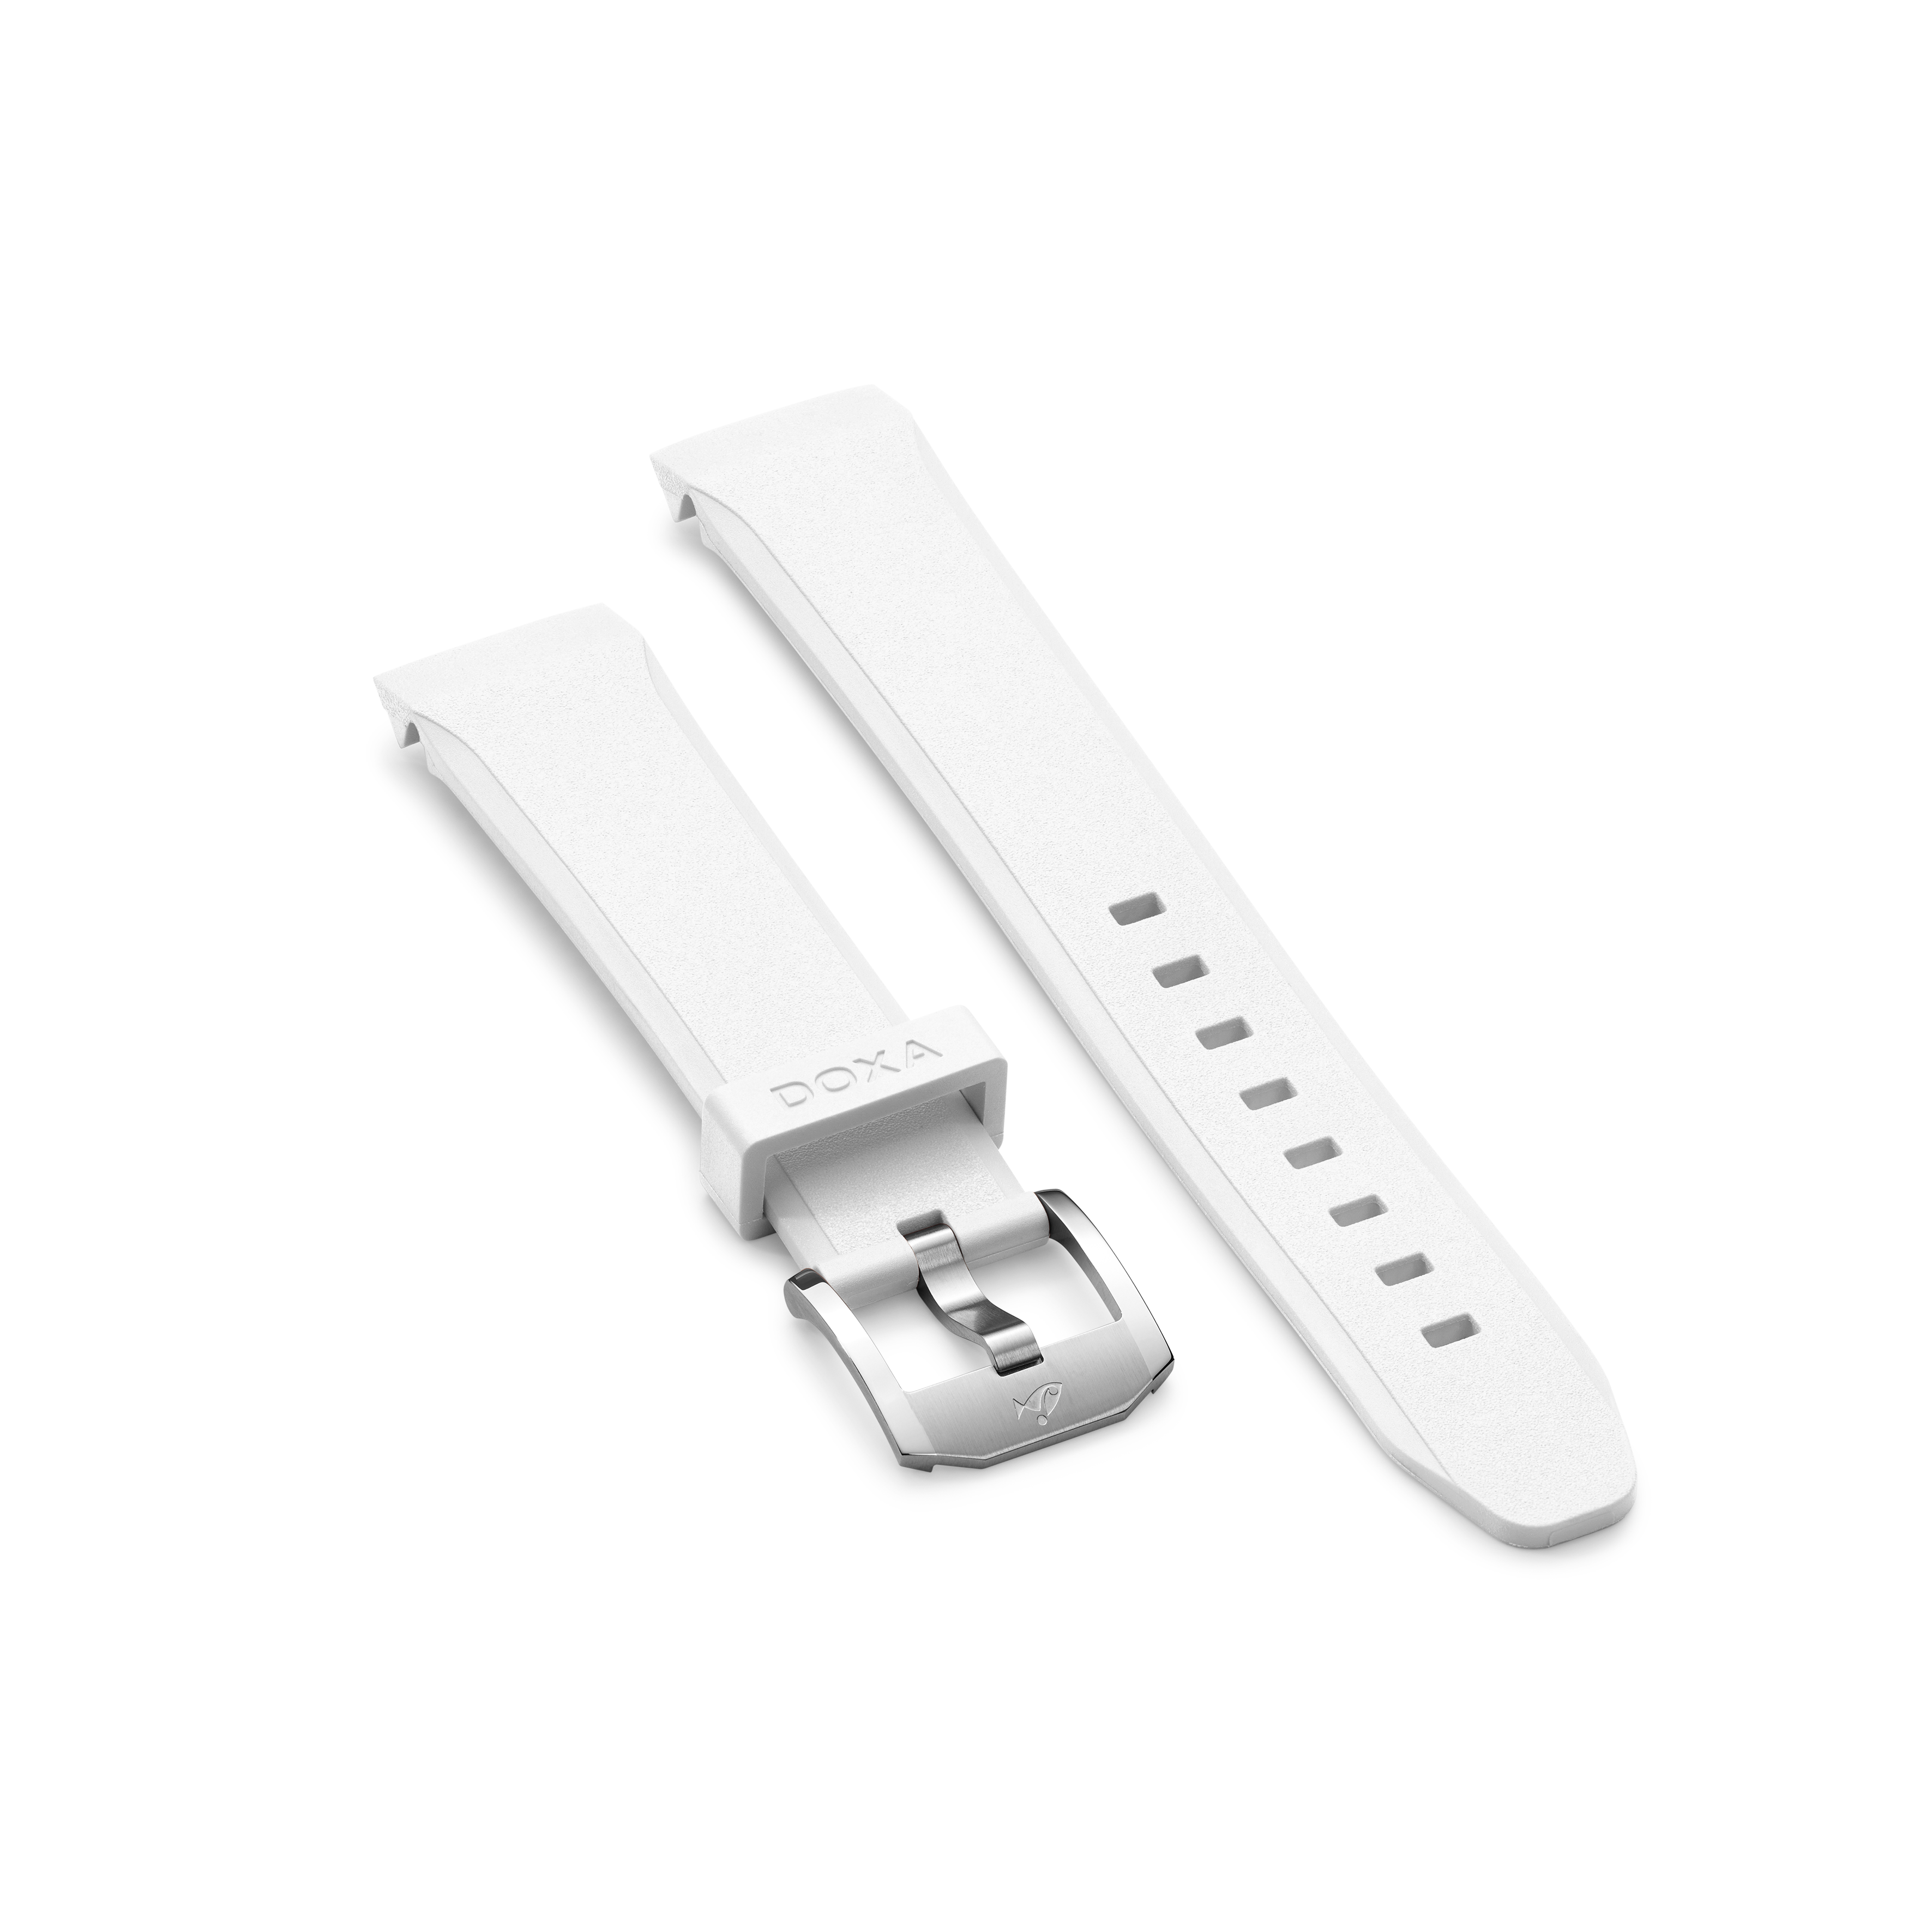 Rubber strap with buckle, White